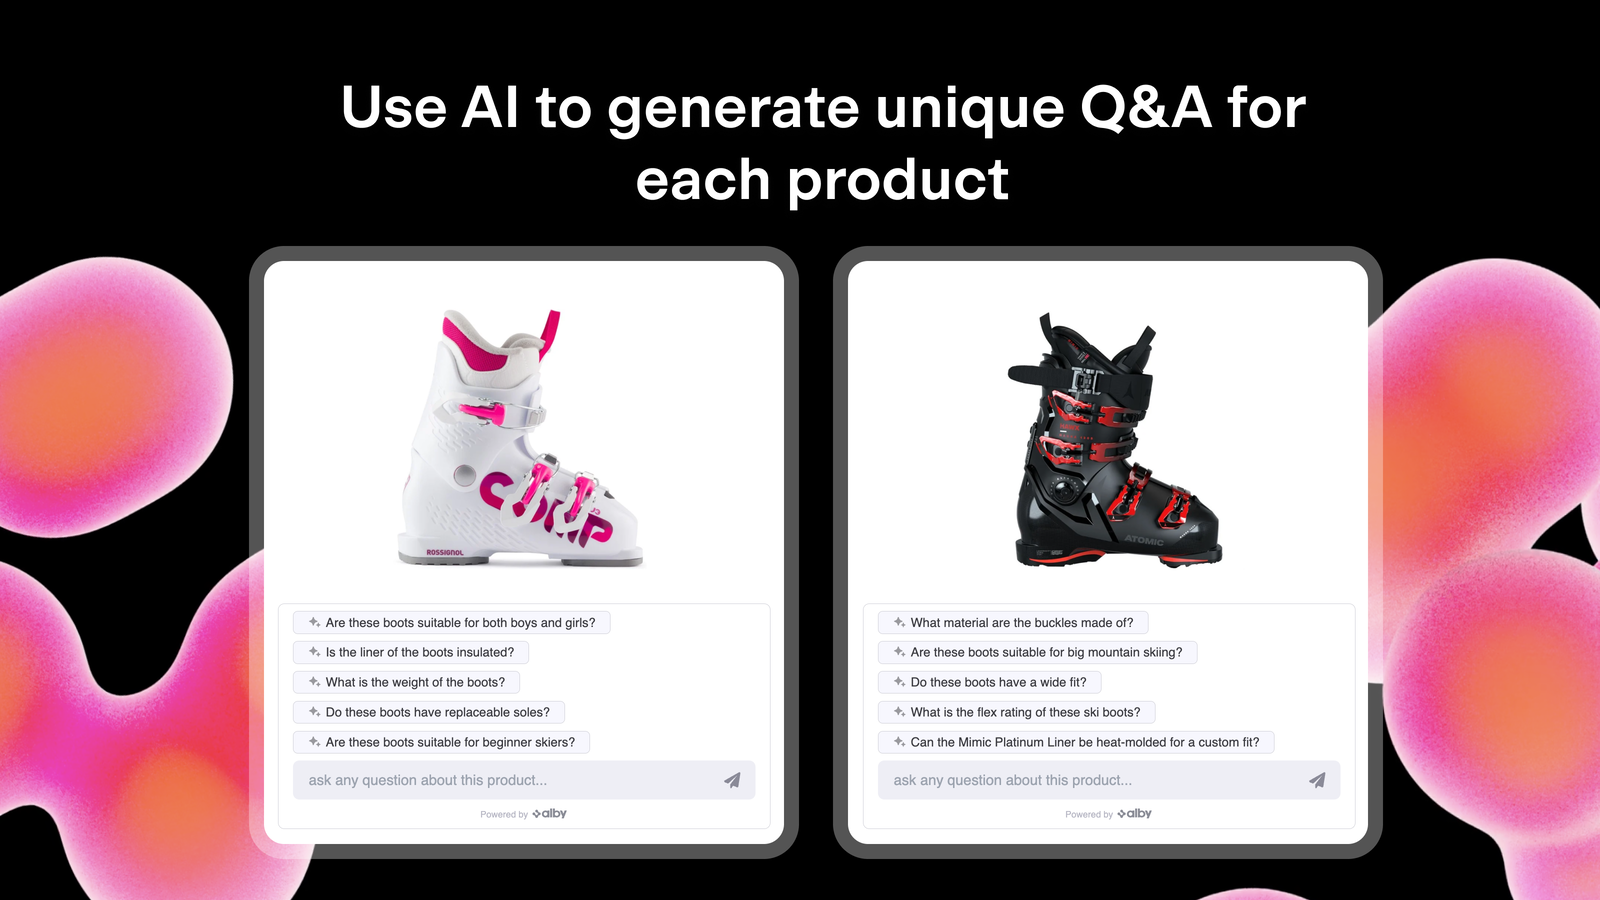 Use AI to generate unique Q&A for each product